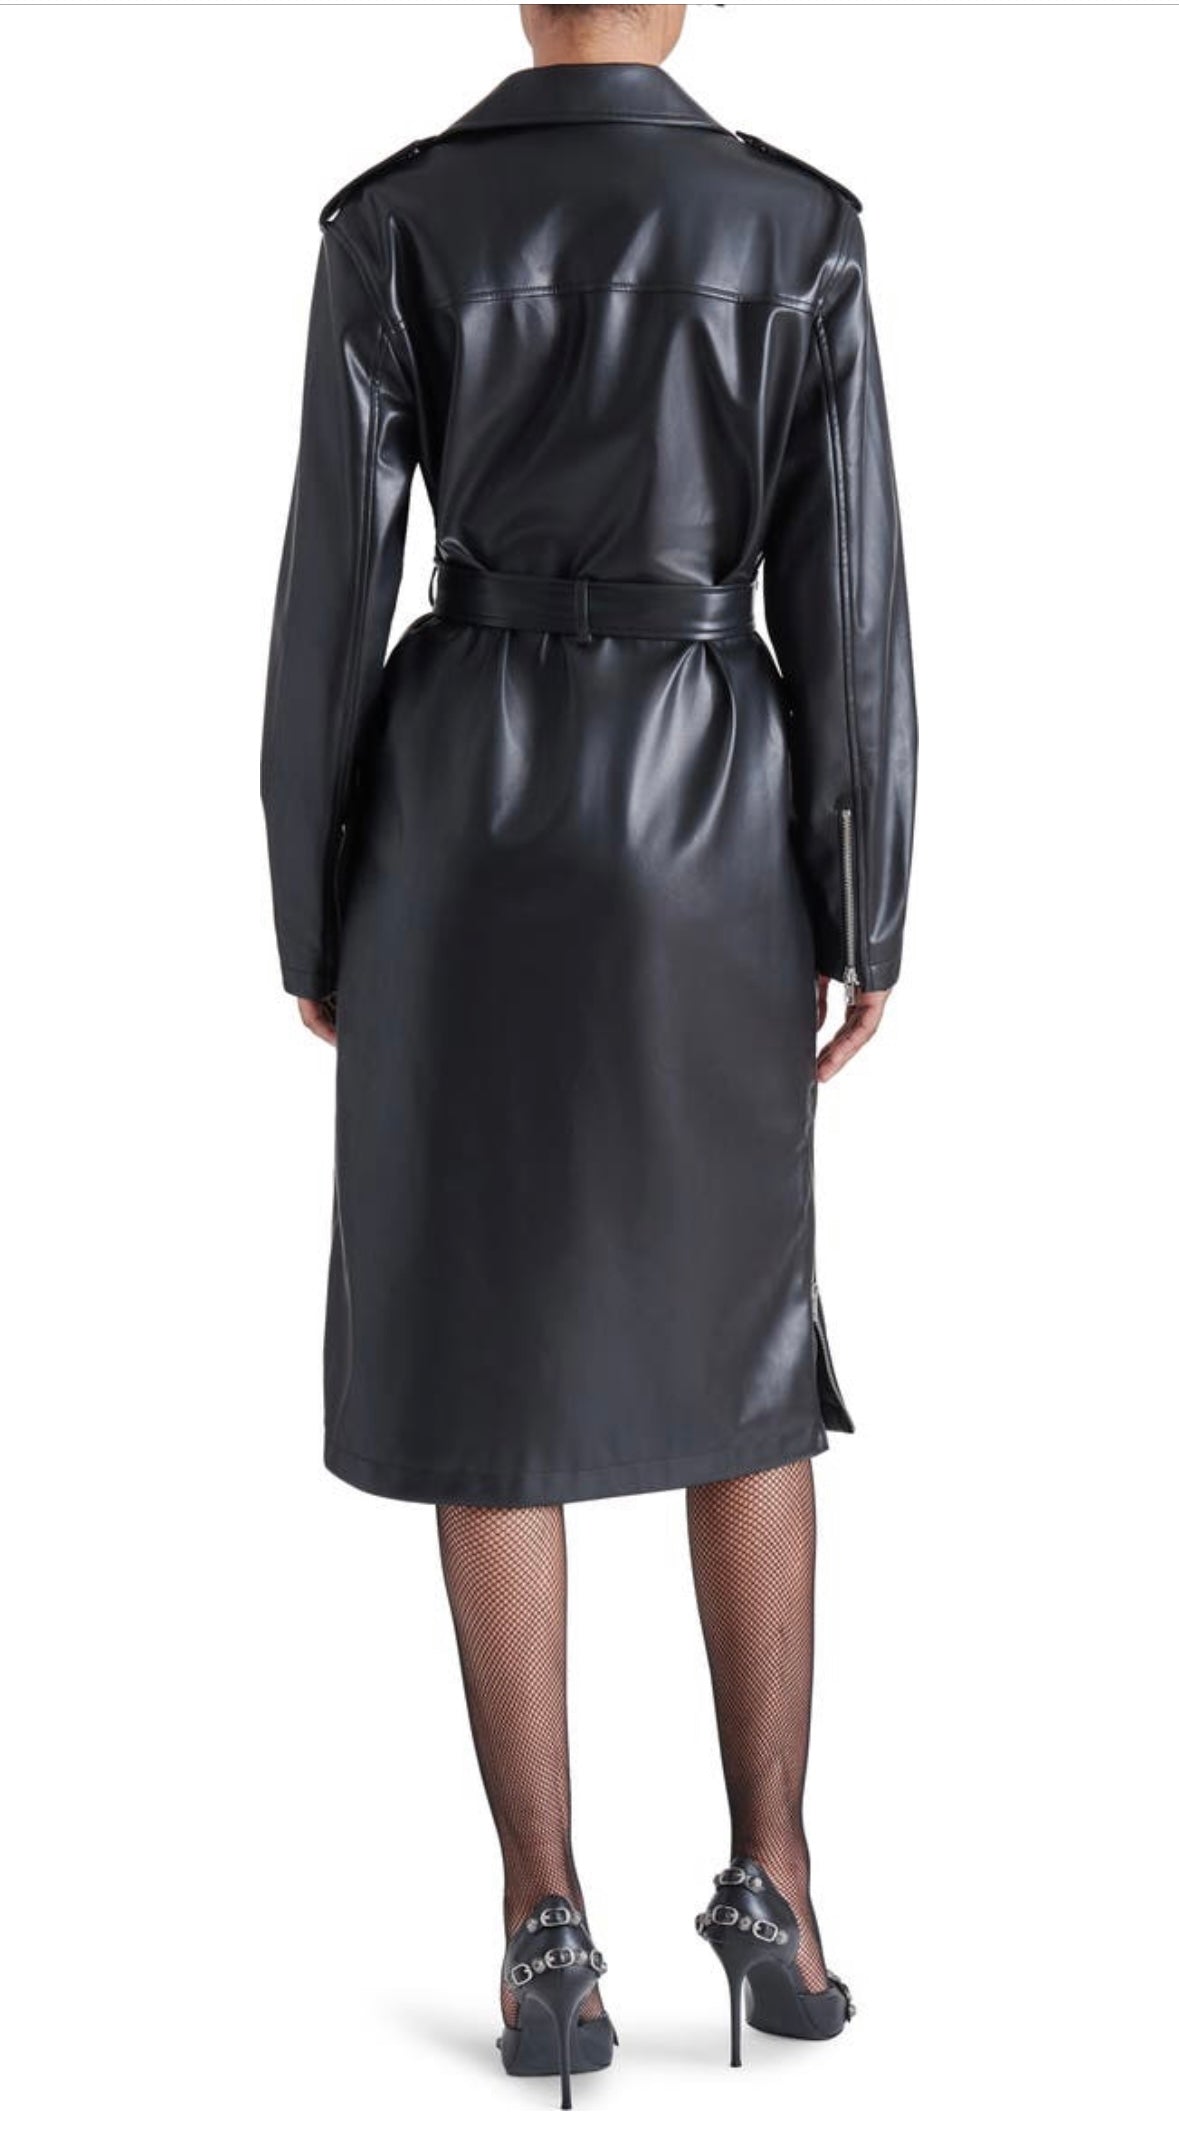 Kenna Faux Leather Moto Trench Coat